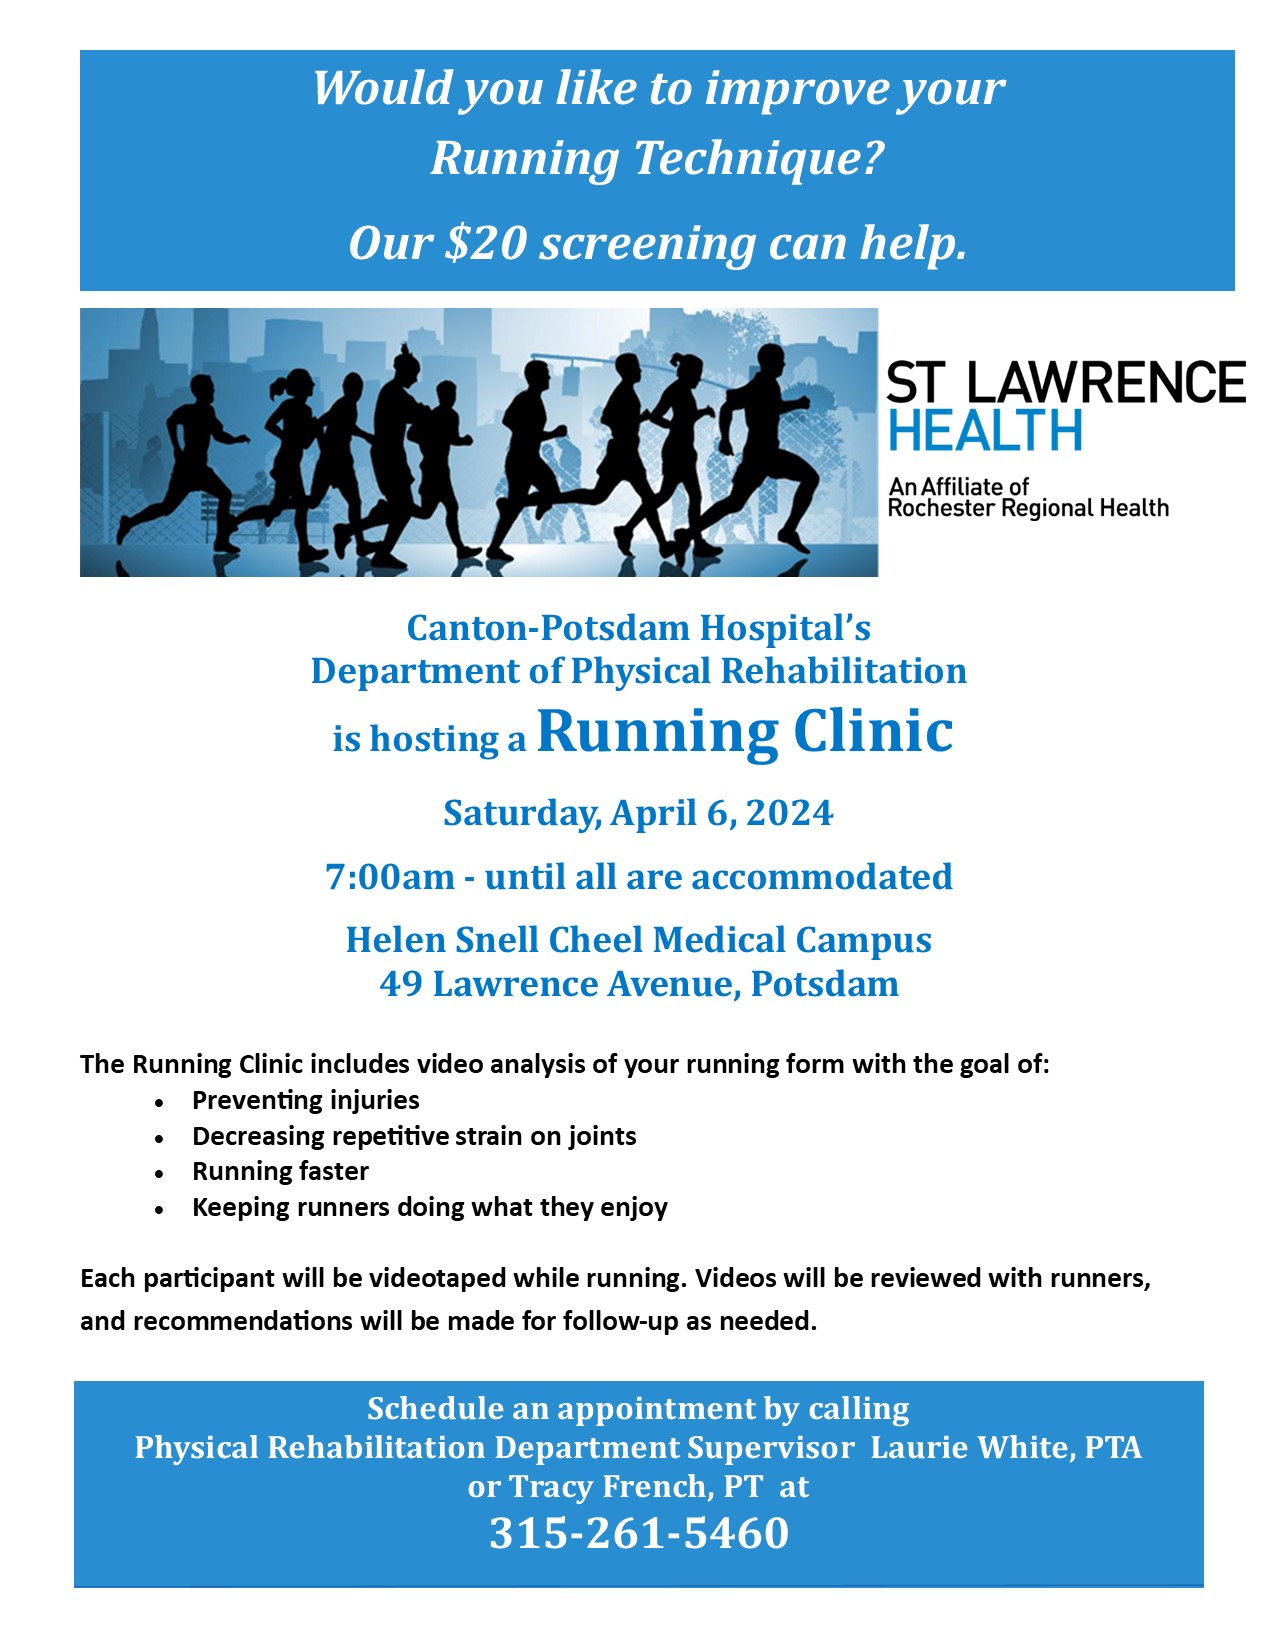 Would you like to improve your Running Technique? Our $20 screening can help. Canton-Potsdam Hospital’s Department of Physical Rehabilitation is hosting a Running Clinic Saturday, April 6, 2024 7:00am - until all are accommodated Helen Snell Cheel Medical Campus 49 Lawrence Avenue, Potsdam The Running Clinic includes video analysis of your running form with the goal of: · Preventing injuries · Decreasing repetitive strain on joints · Running faster · Keeping runners doing what they enjoy Each participant will be videotaped while running. Videos will be reviewed with runners, and recommendations will be made for follow-up as needed. Schedule an appointment by calling Physical Rehabilitation Department Supervisor Laurie White, PTA or Tracy French PT at 315-261-5460 ST. Lawrence Health an affiliate of Rochester Regional Hospital